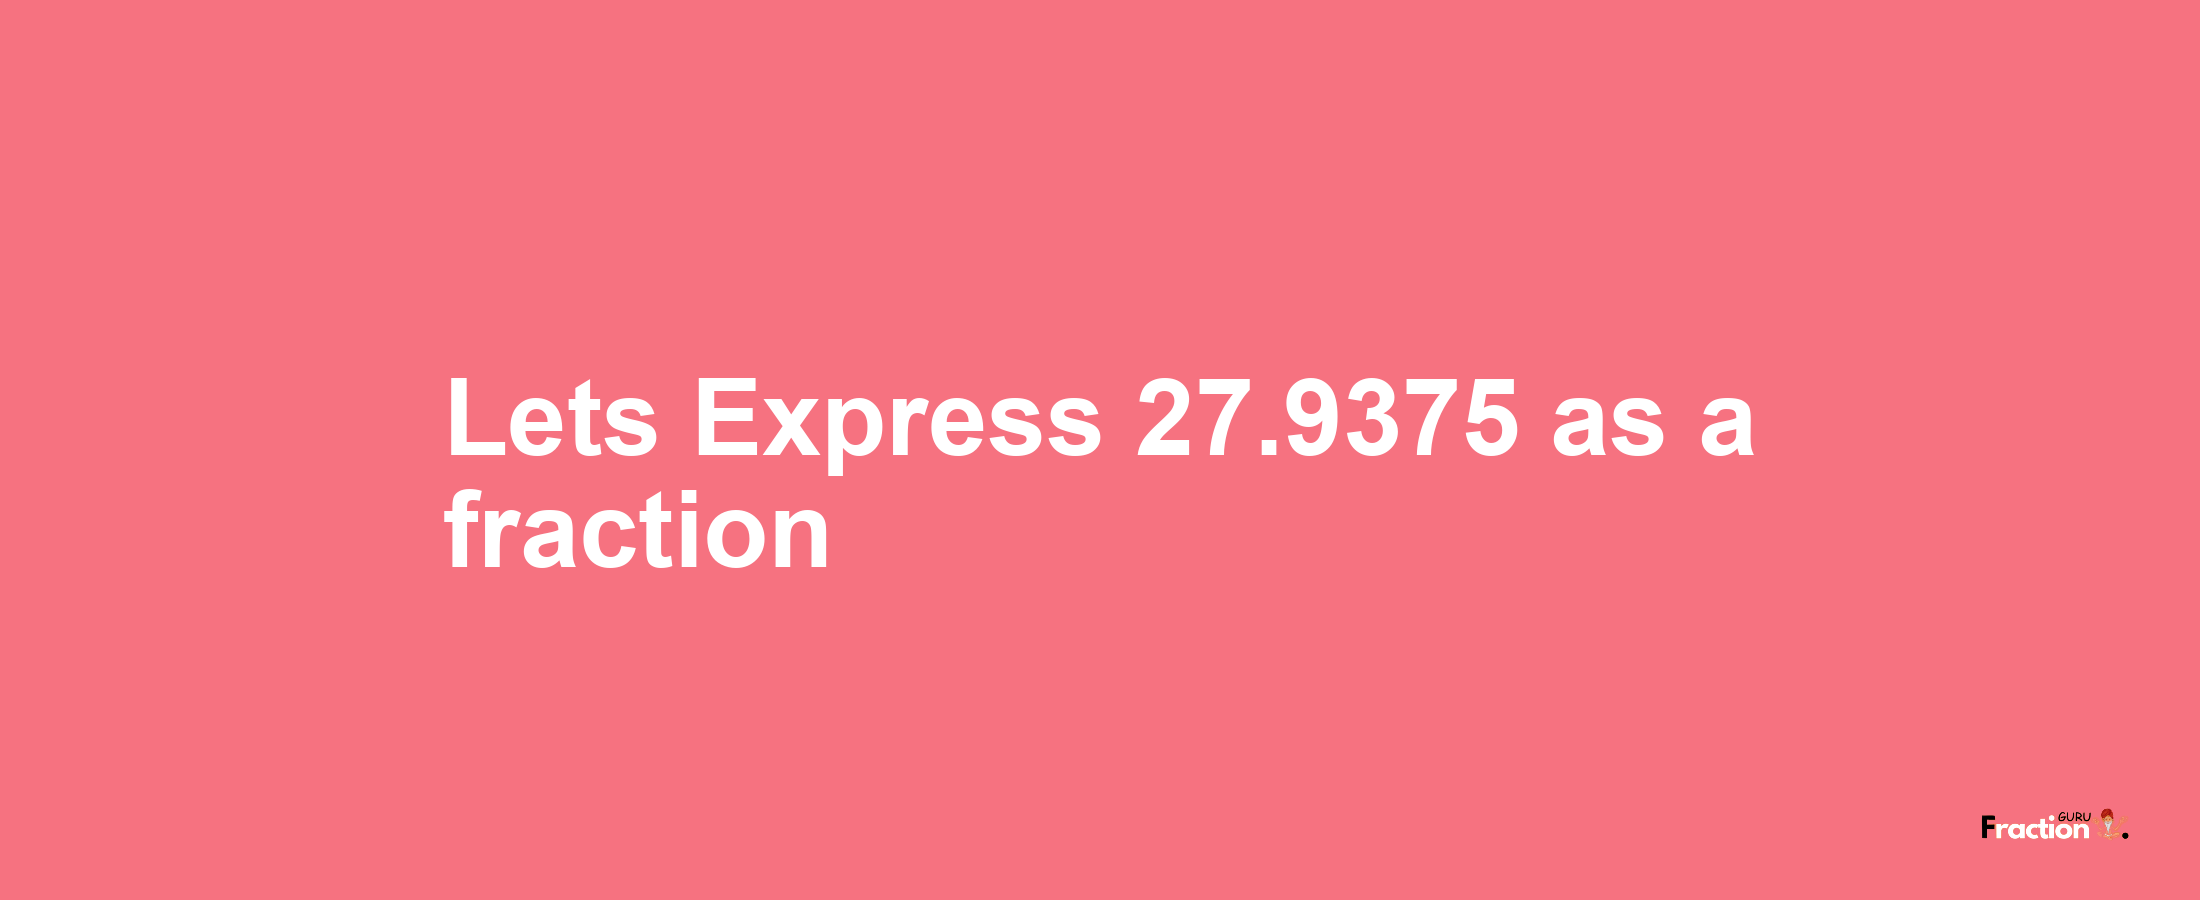 Lets Express 27.9375 as afraction